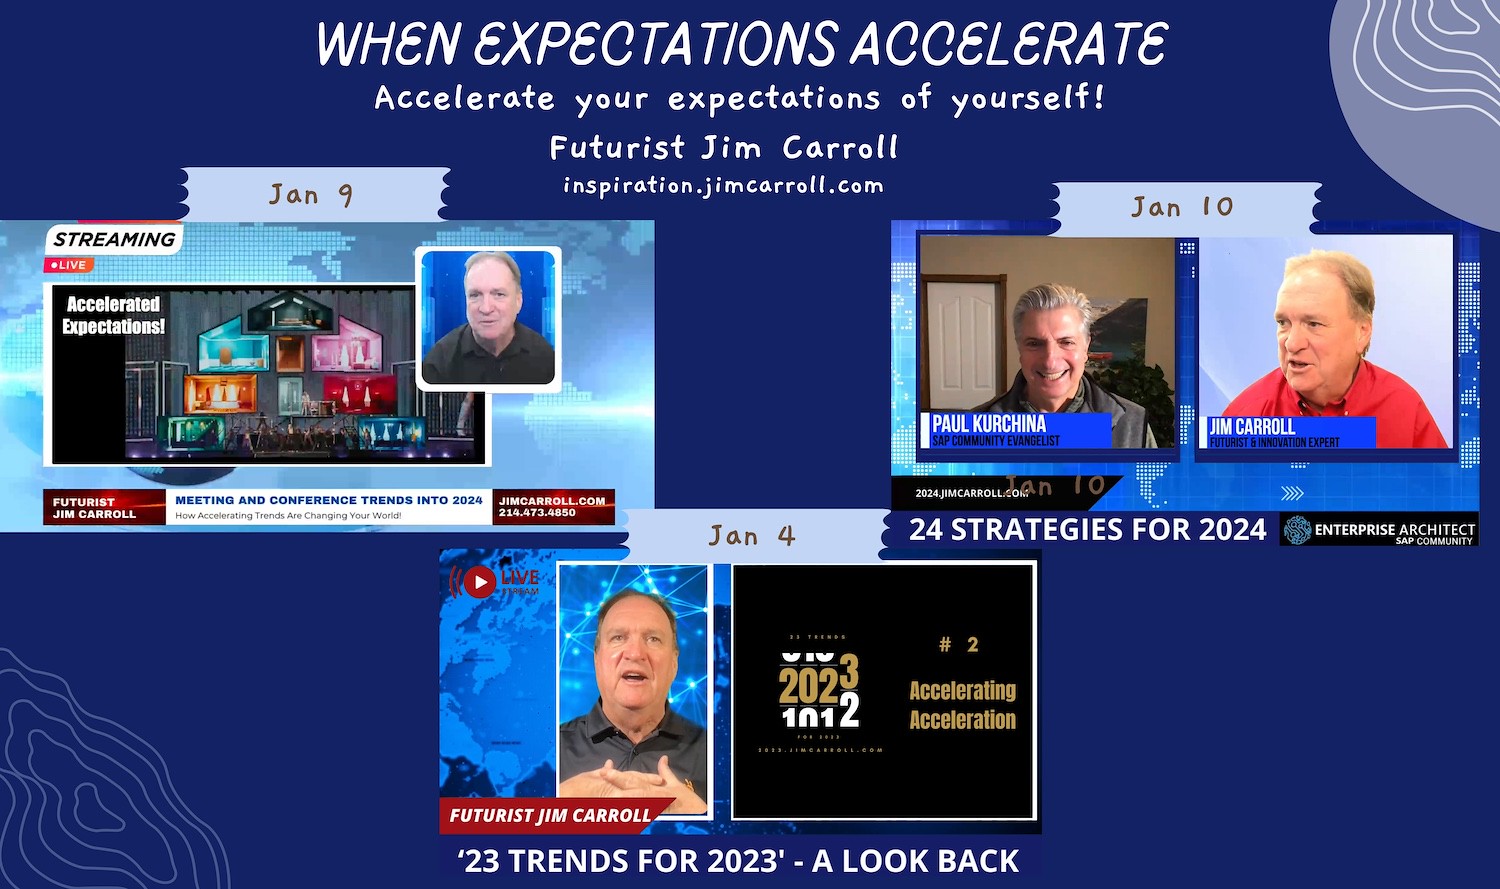 "When expectations accelerate, accelerate your expectations of yourself!" - Futurist Jim Carroll